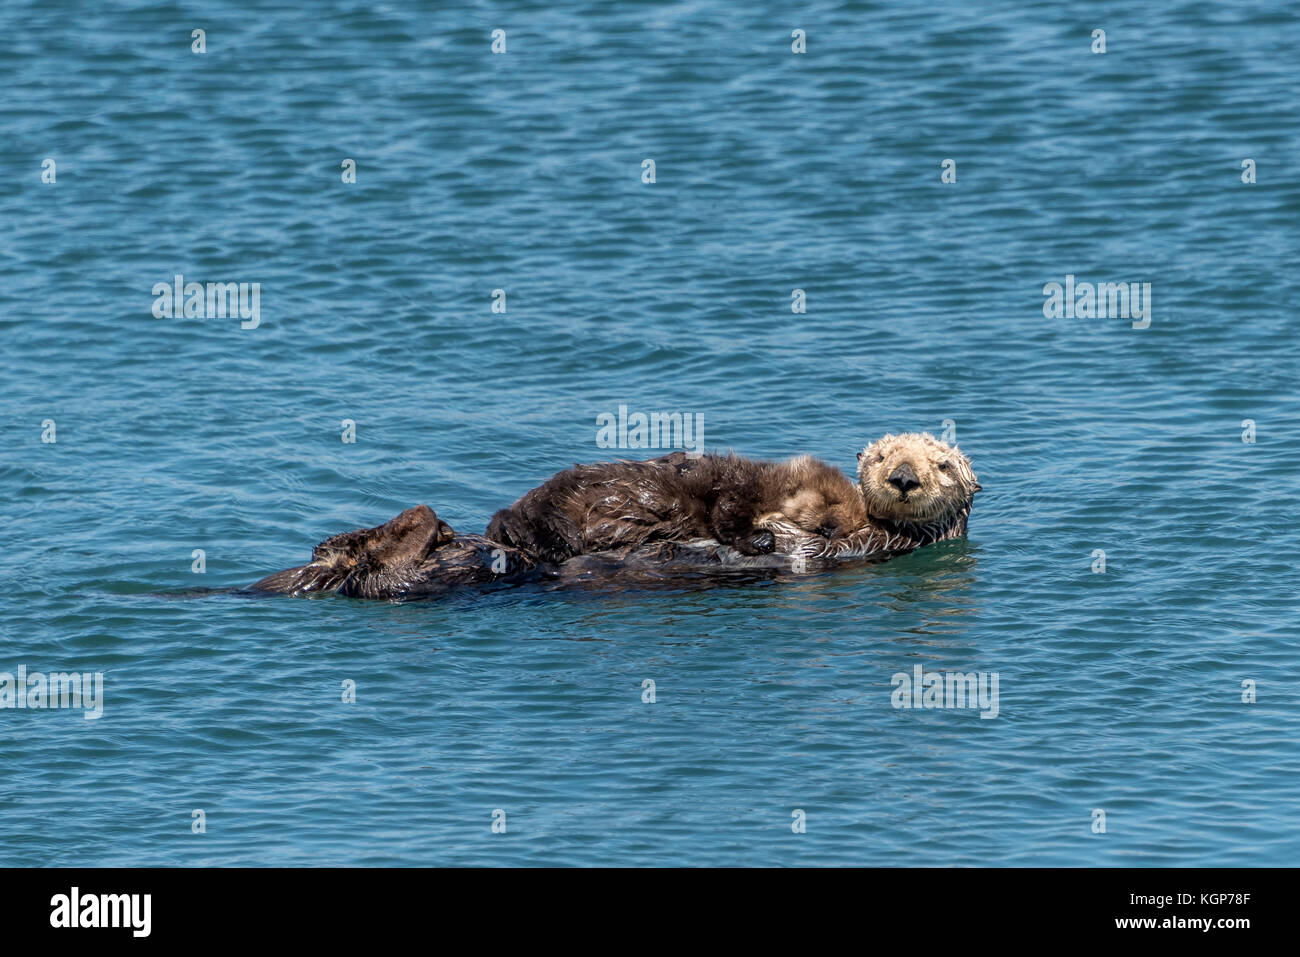 Mother and baby sea otter in water at Morro Bay, California; cute baby otter sleeping on mom's chest, tiny hand visible, as she looks to shore. Stock Photo